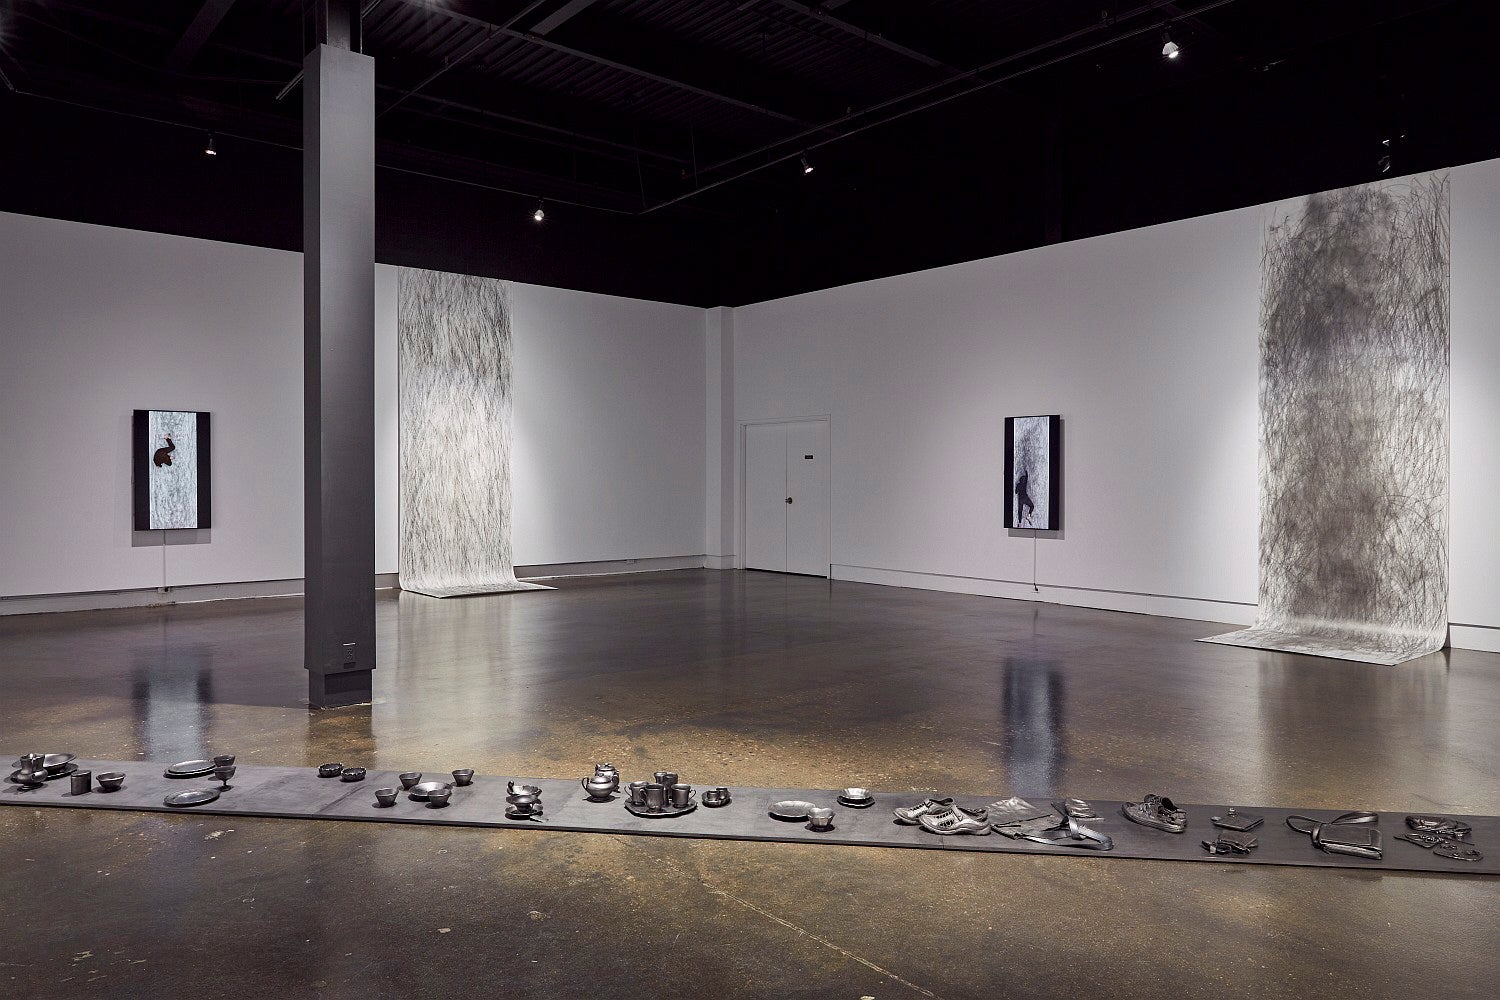 Art gallery exhibition with video monitors, large hanging drawings that drape onto the floor, and a row of blackened objects on the floor.